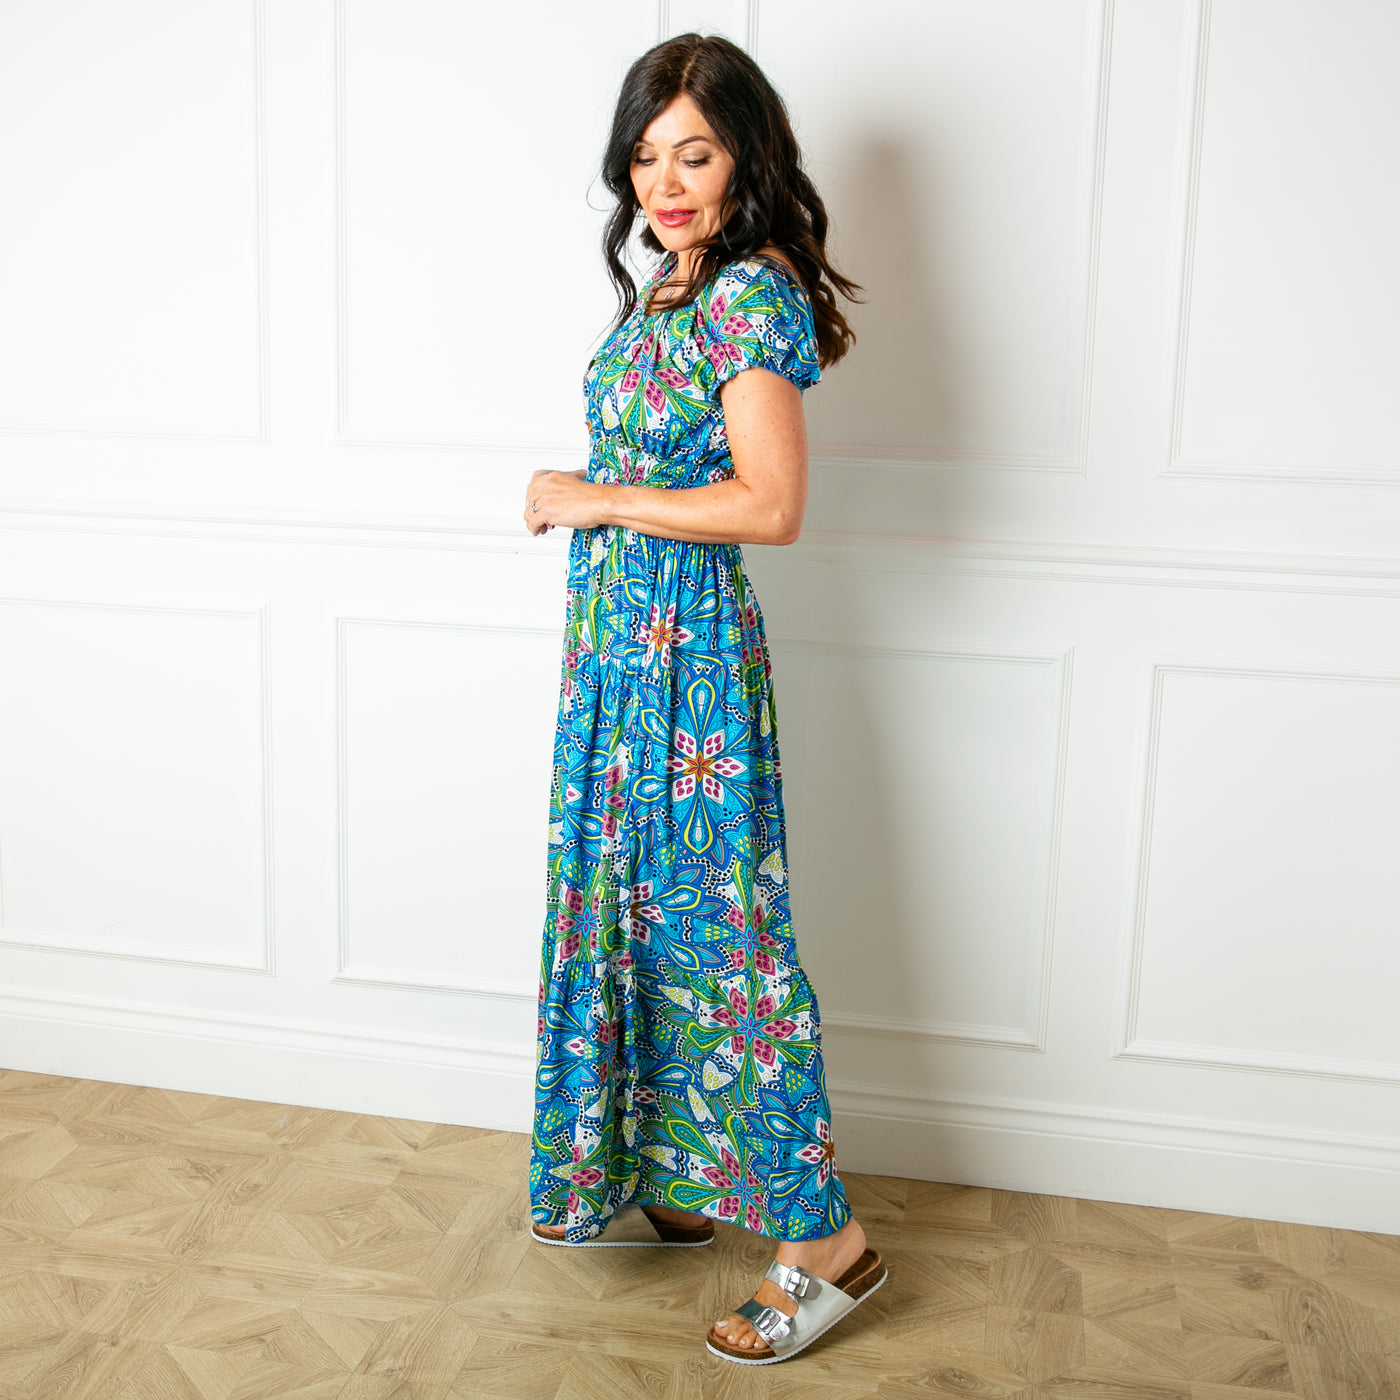 The blue Printed Button Maxi Dress with a shirred elasticted waistband and button detailing down the front